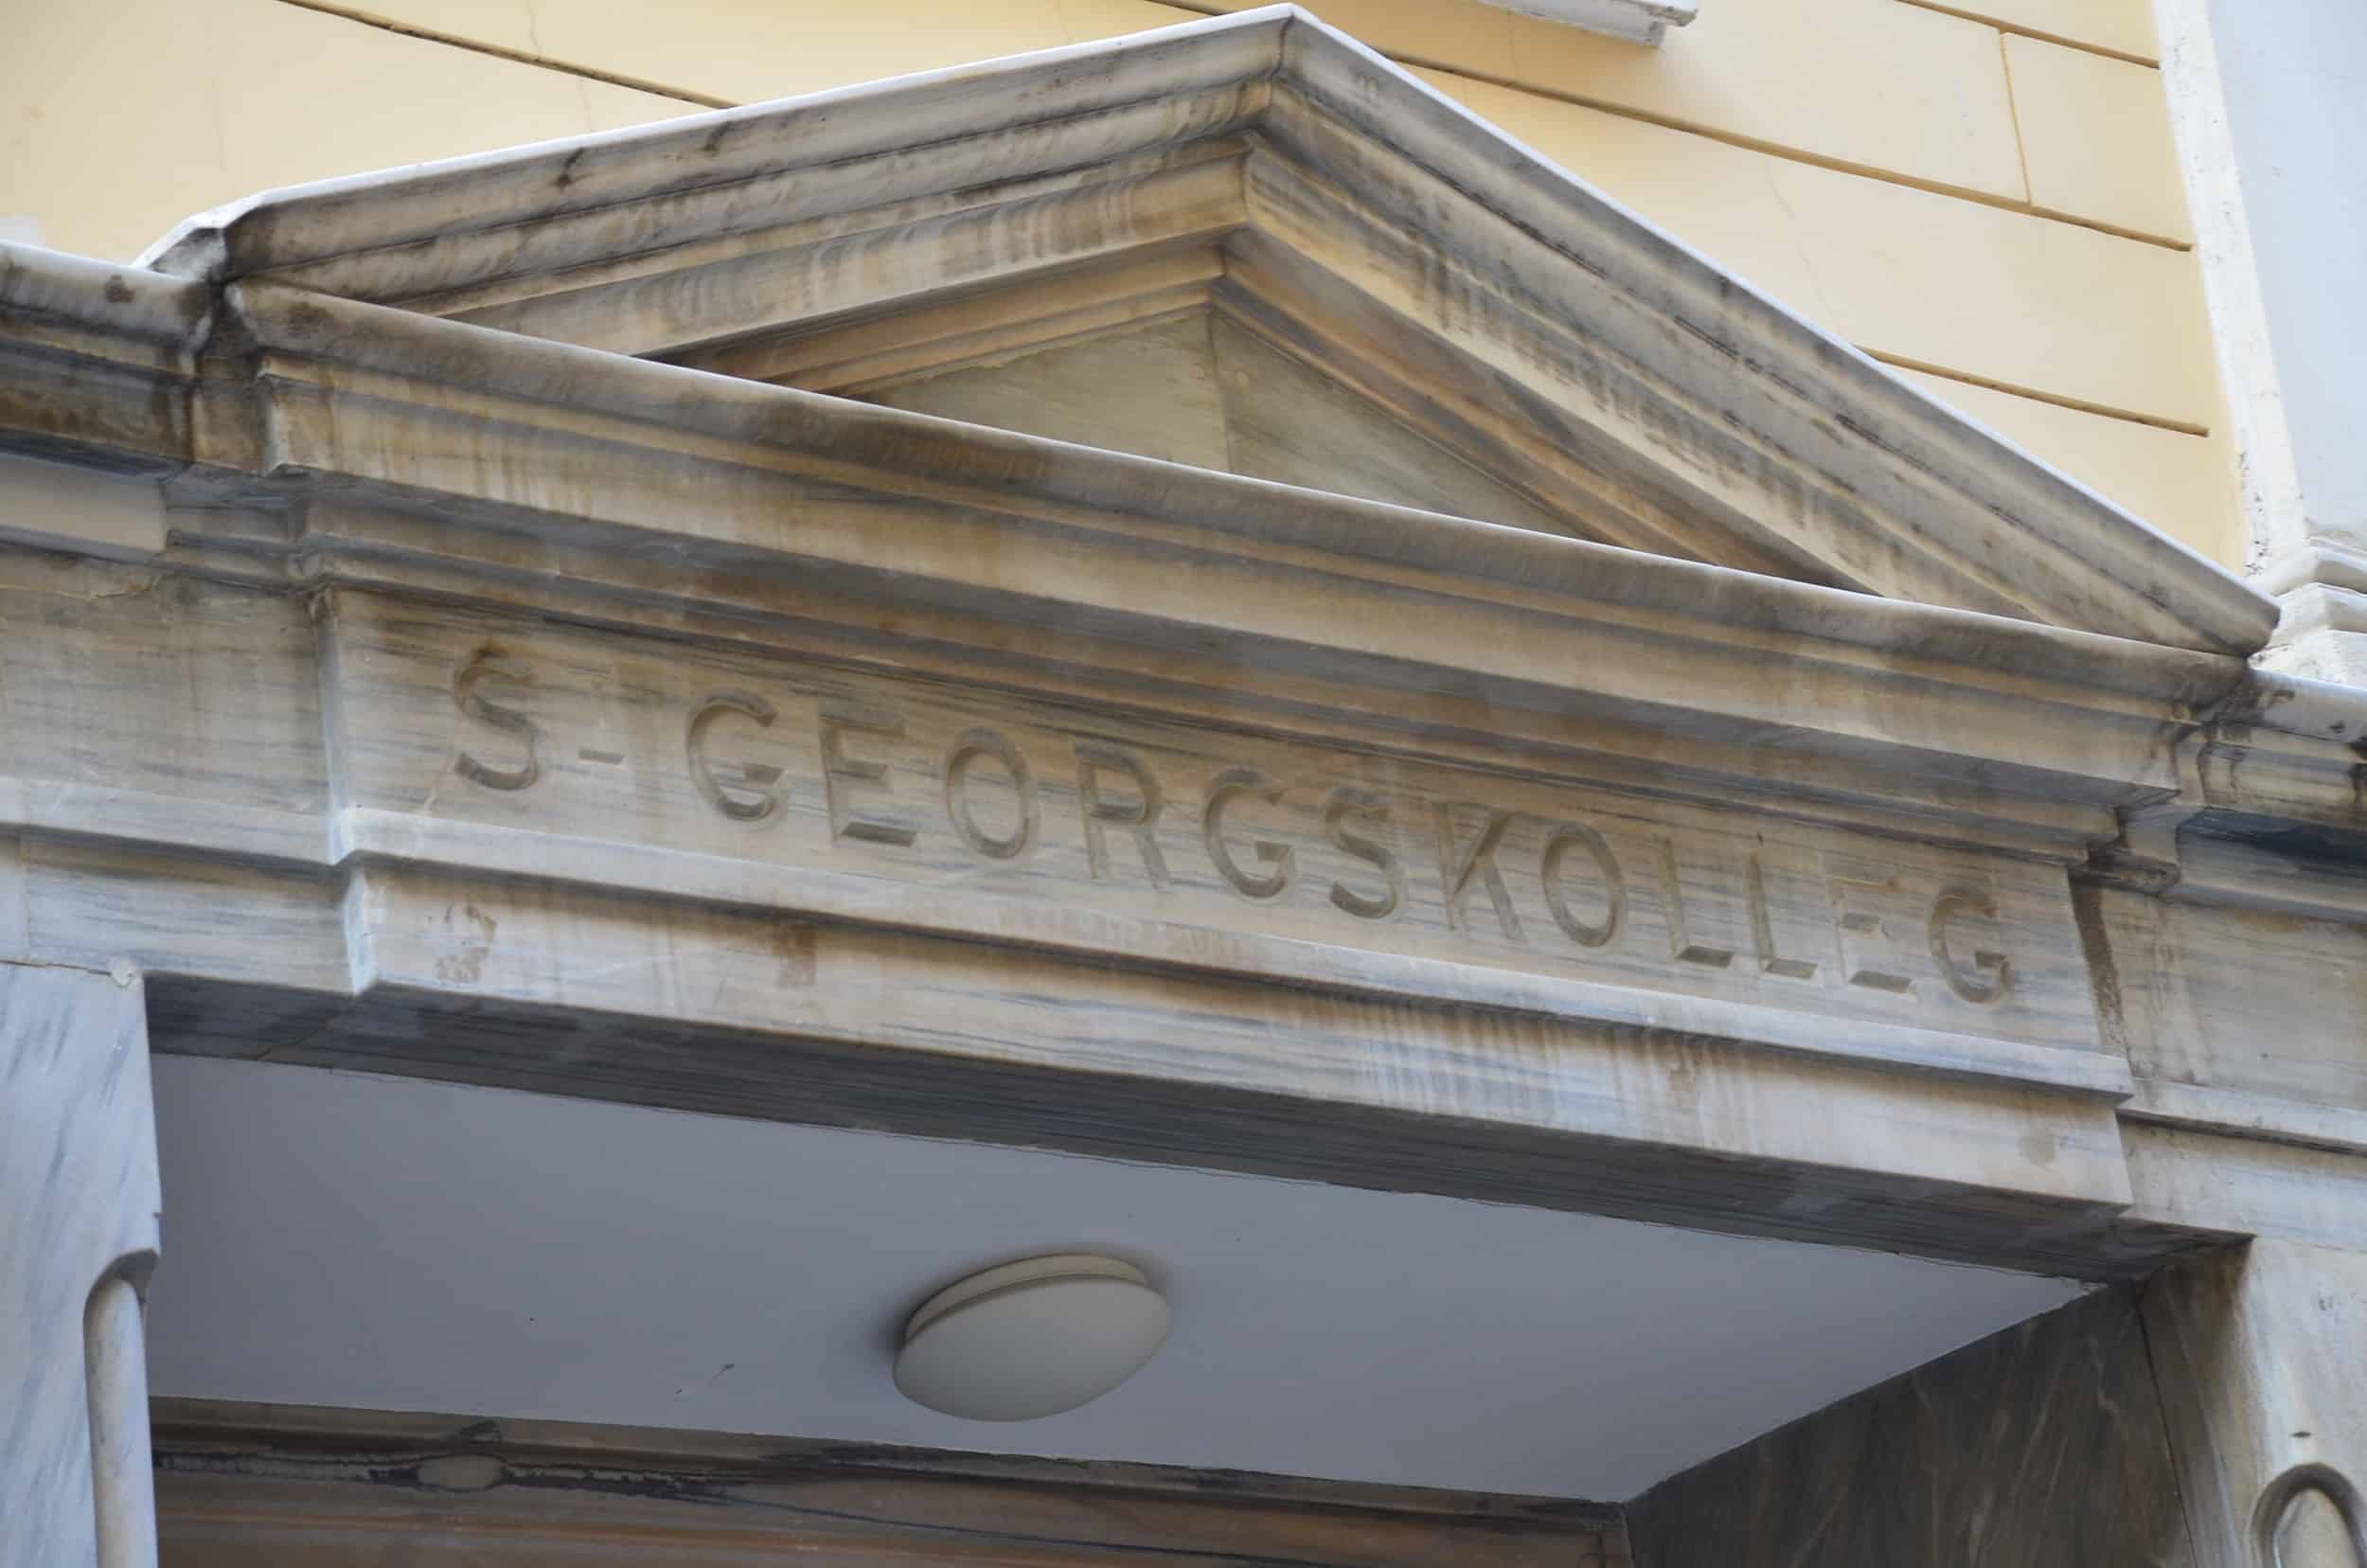 Inscription above the entrance to St. George's Austrian High School in Galata, Istanbul, Turkey